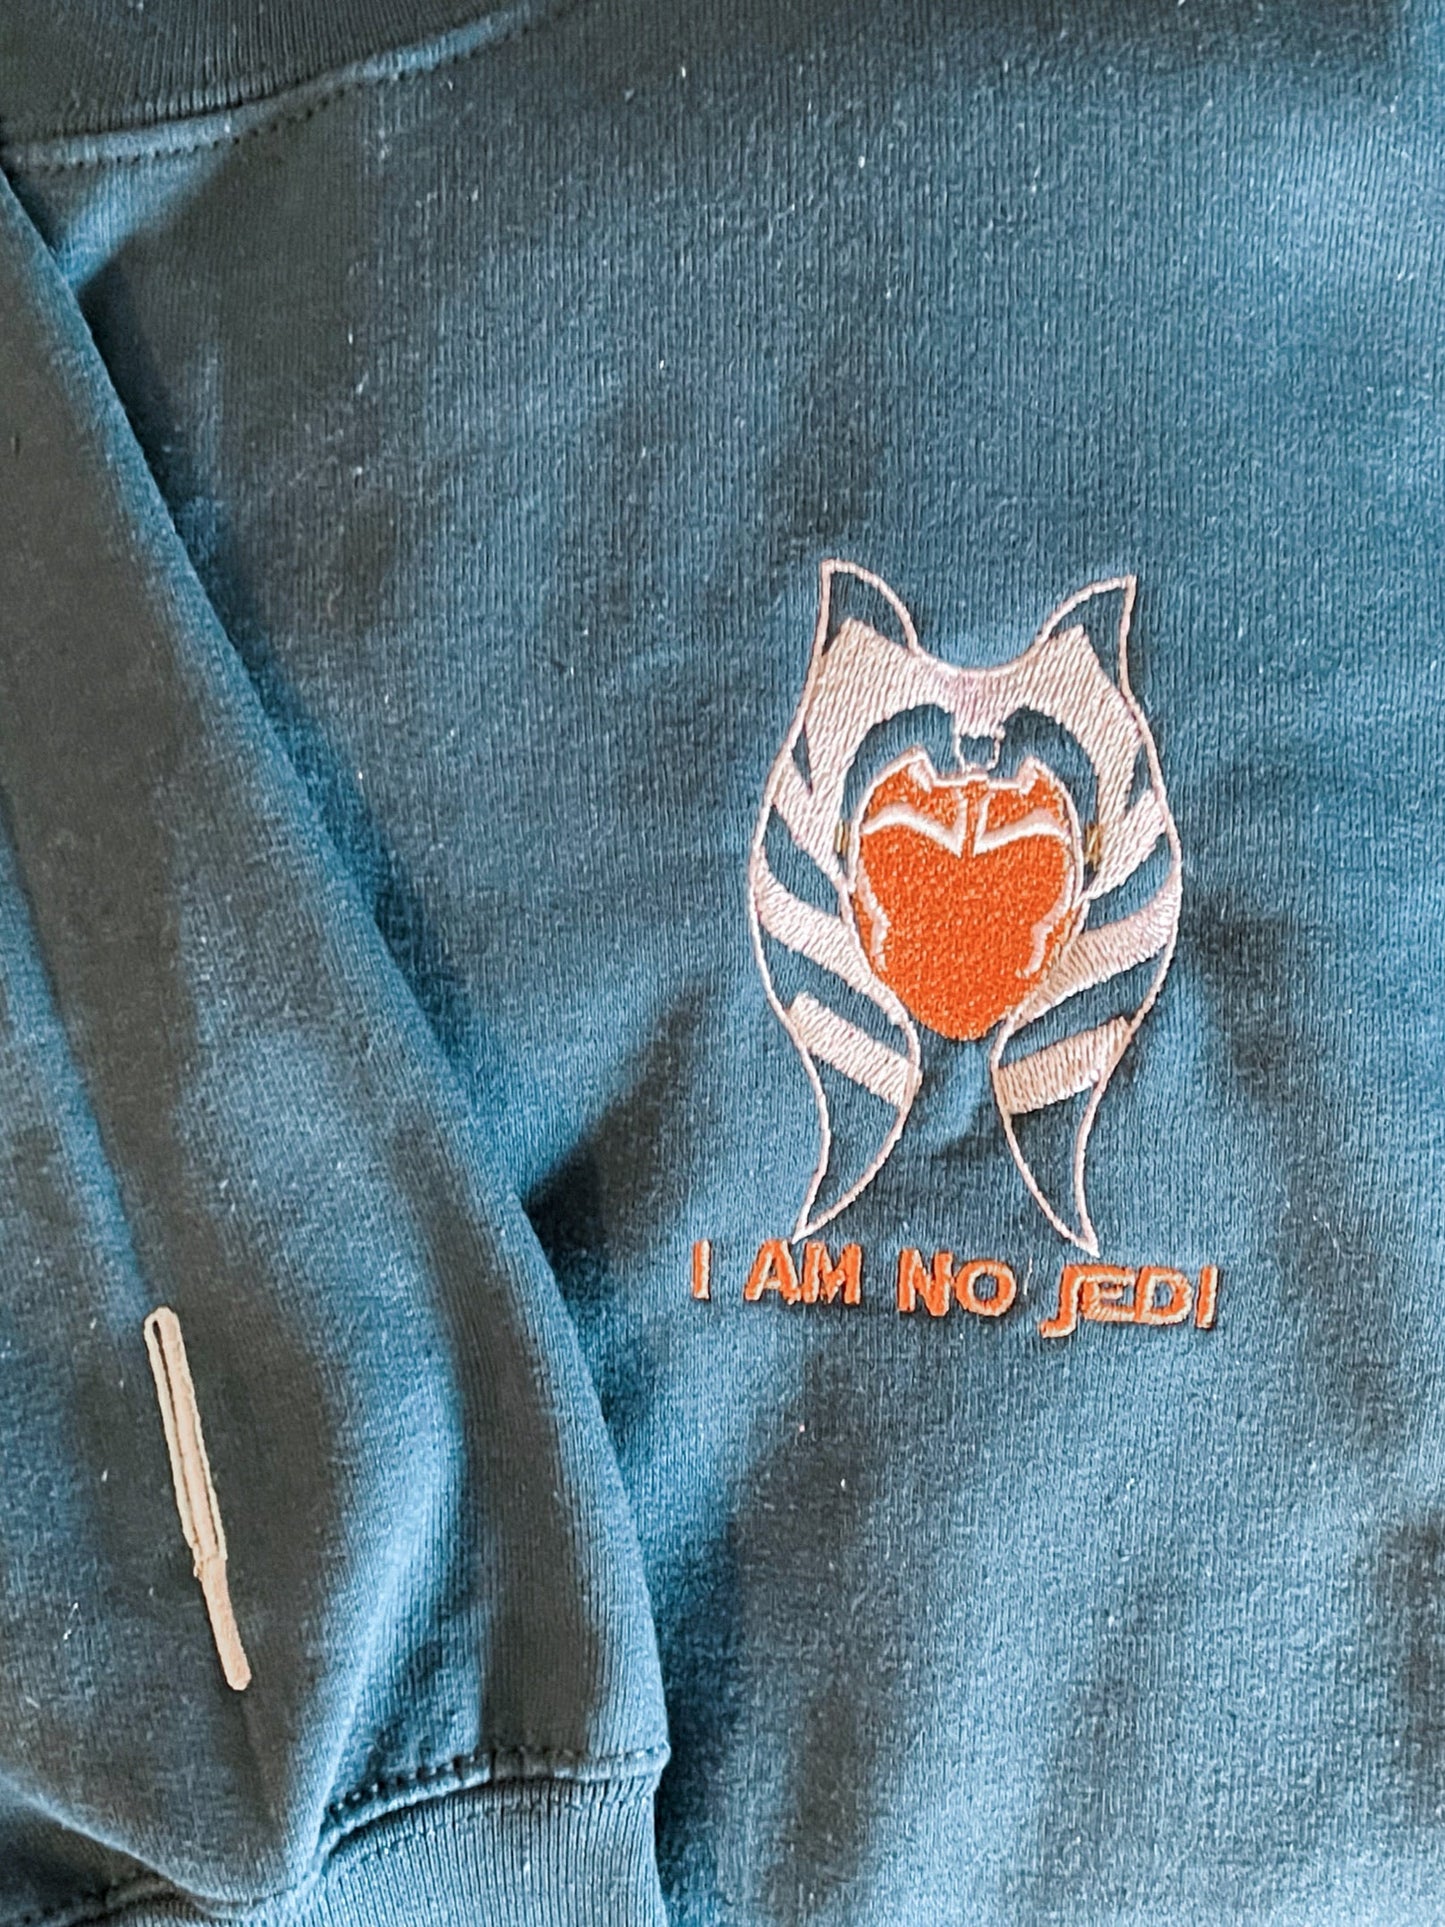 A Tano embroidered sweatshirt